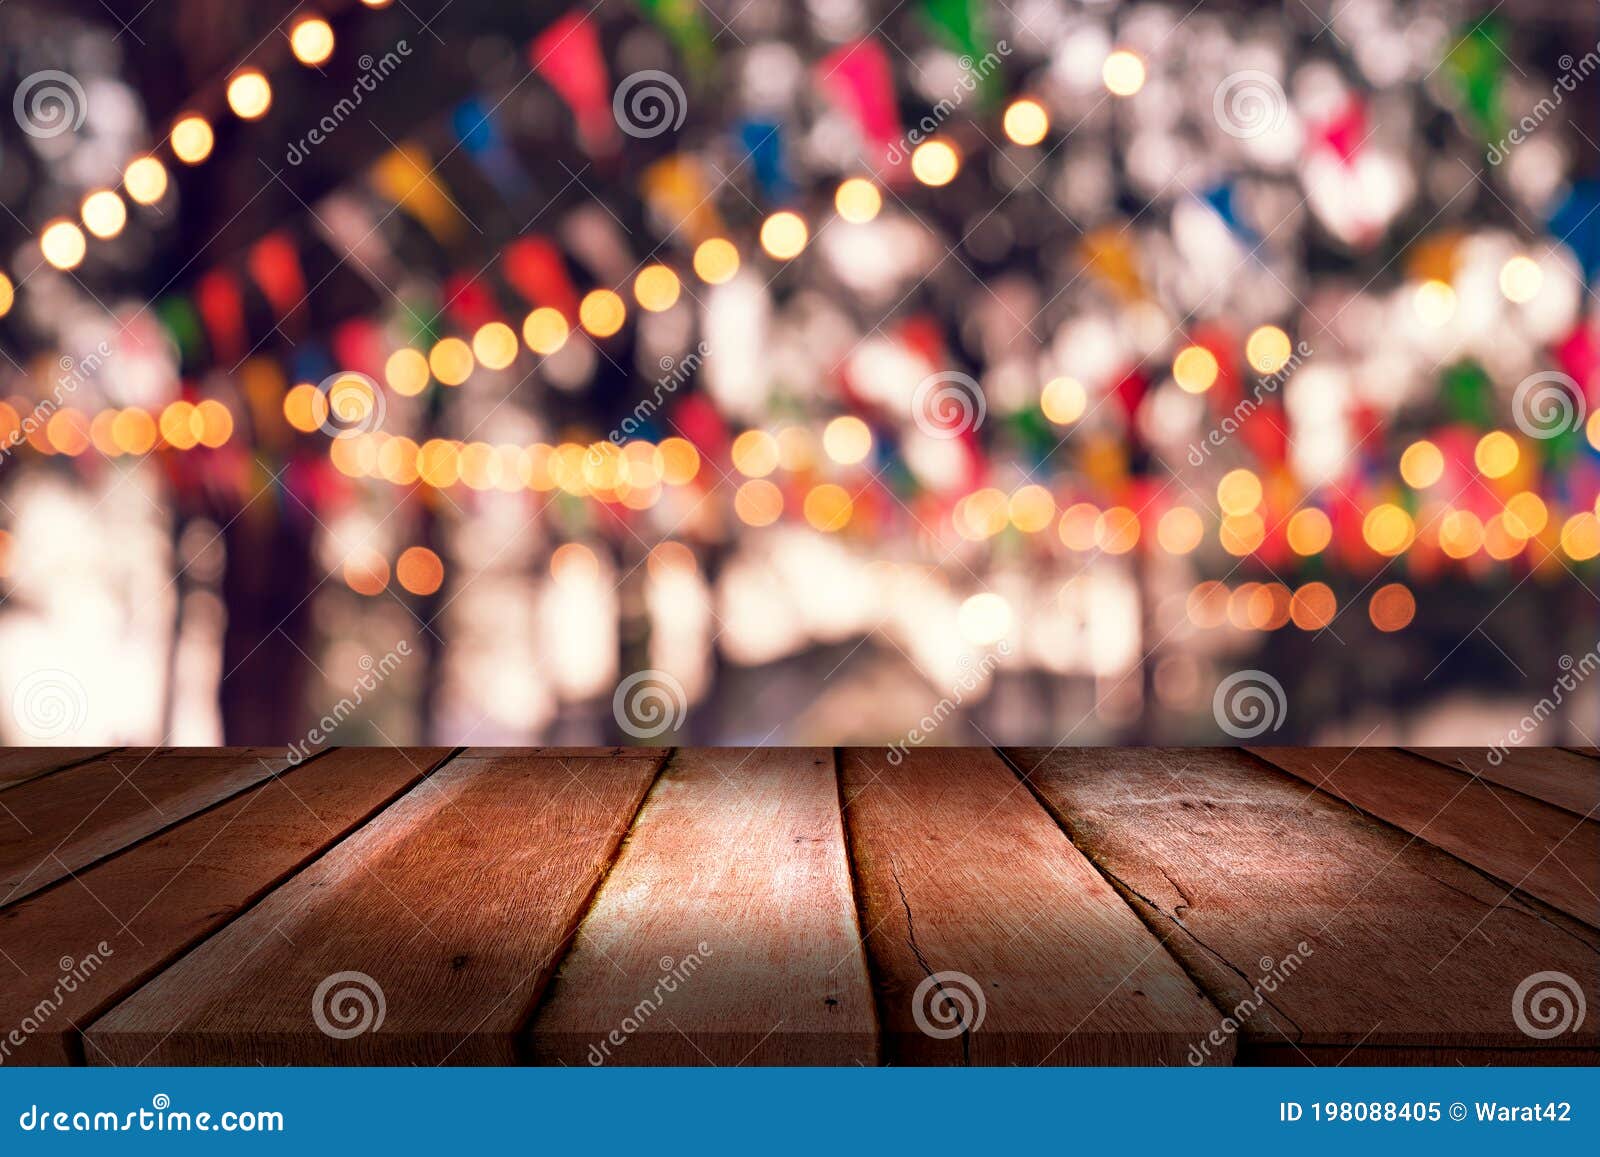 Top Desk with Blur Restaurant Background,Wooden Table and Blurred Bokeh of  Night Street Background Stock Image - Image of outdoor, coffee: 198088405